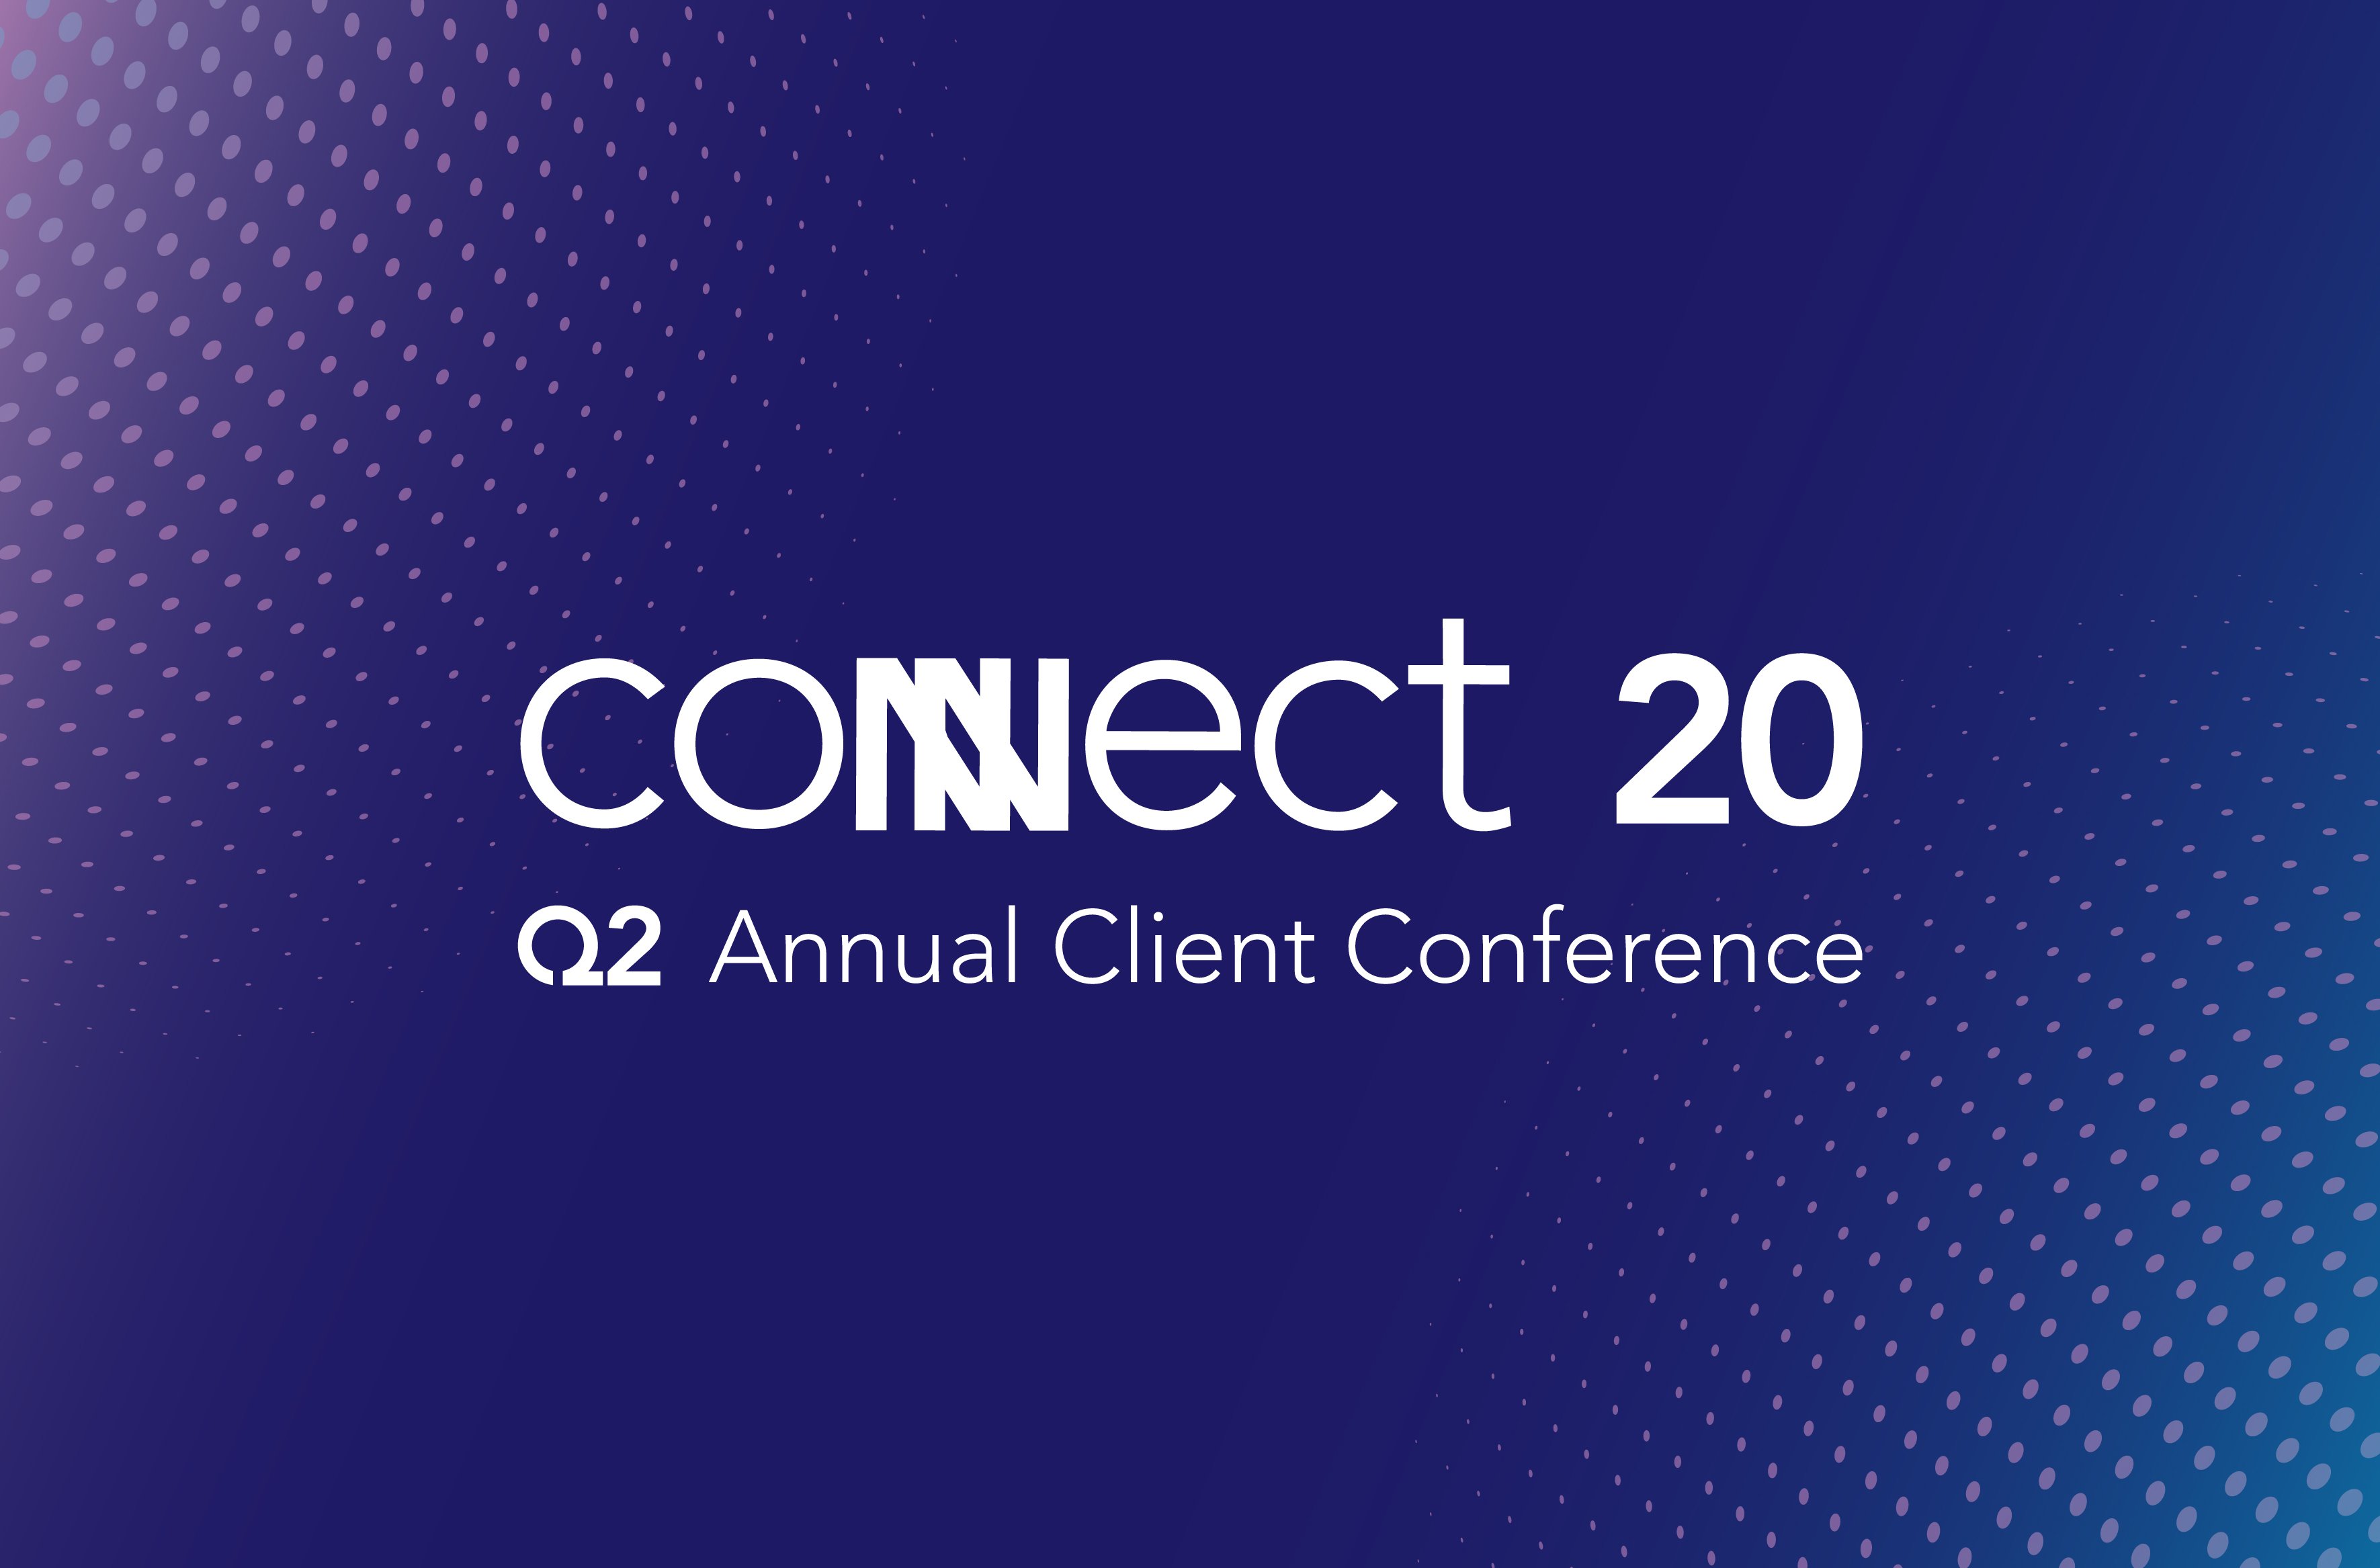 Slated for Today: The Next in the Virtual CONNECT 20 Event Series